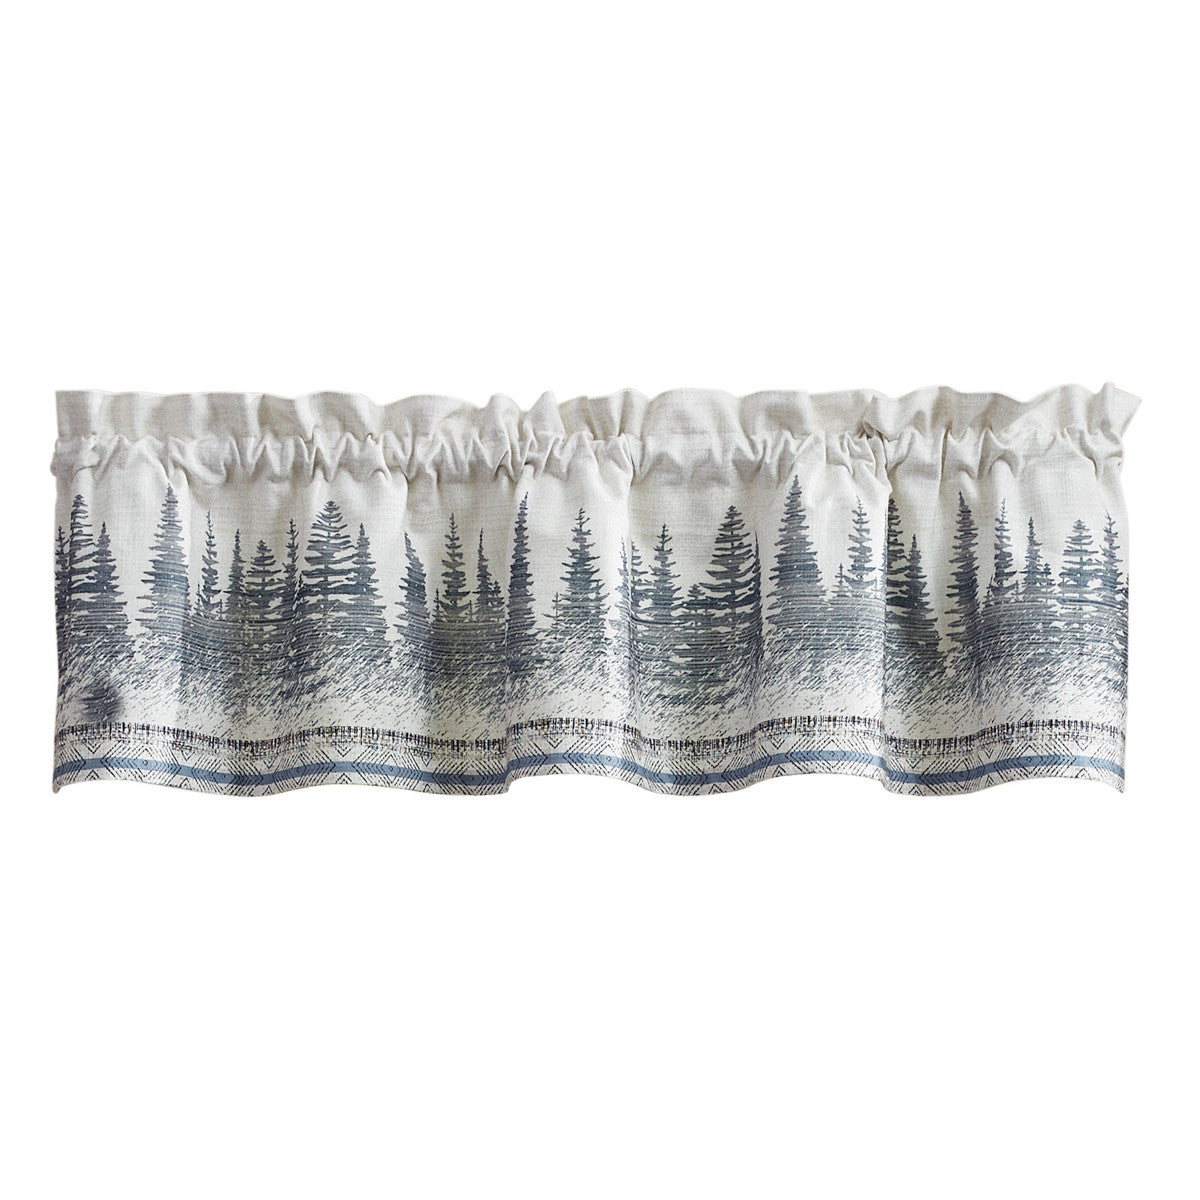 INTO THE WOODS VALANCE  60" x 14"